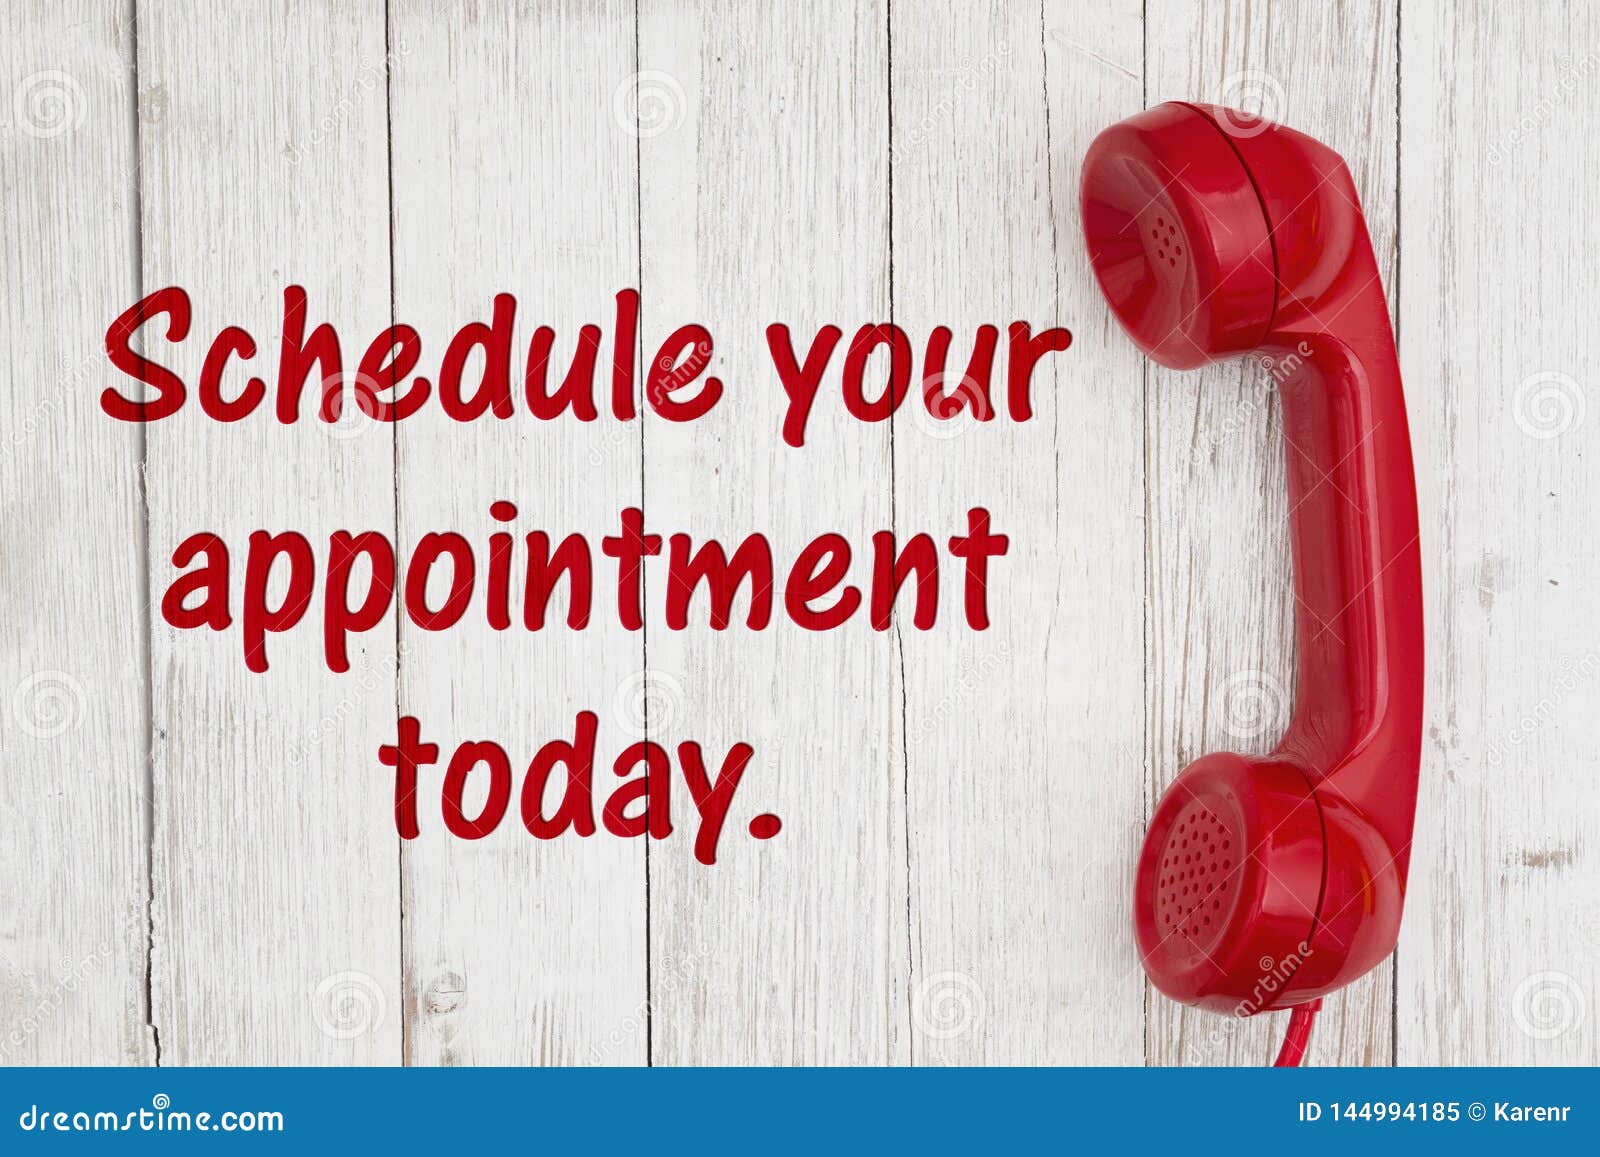 schedule your appointment today text with retro red phone handset